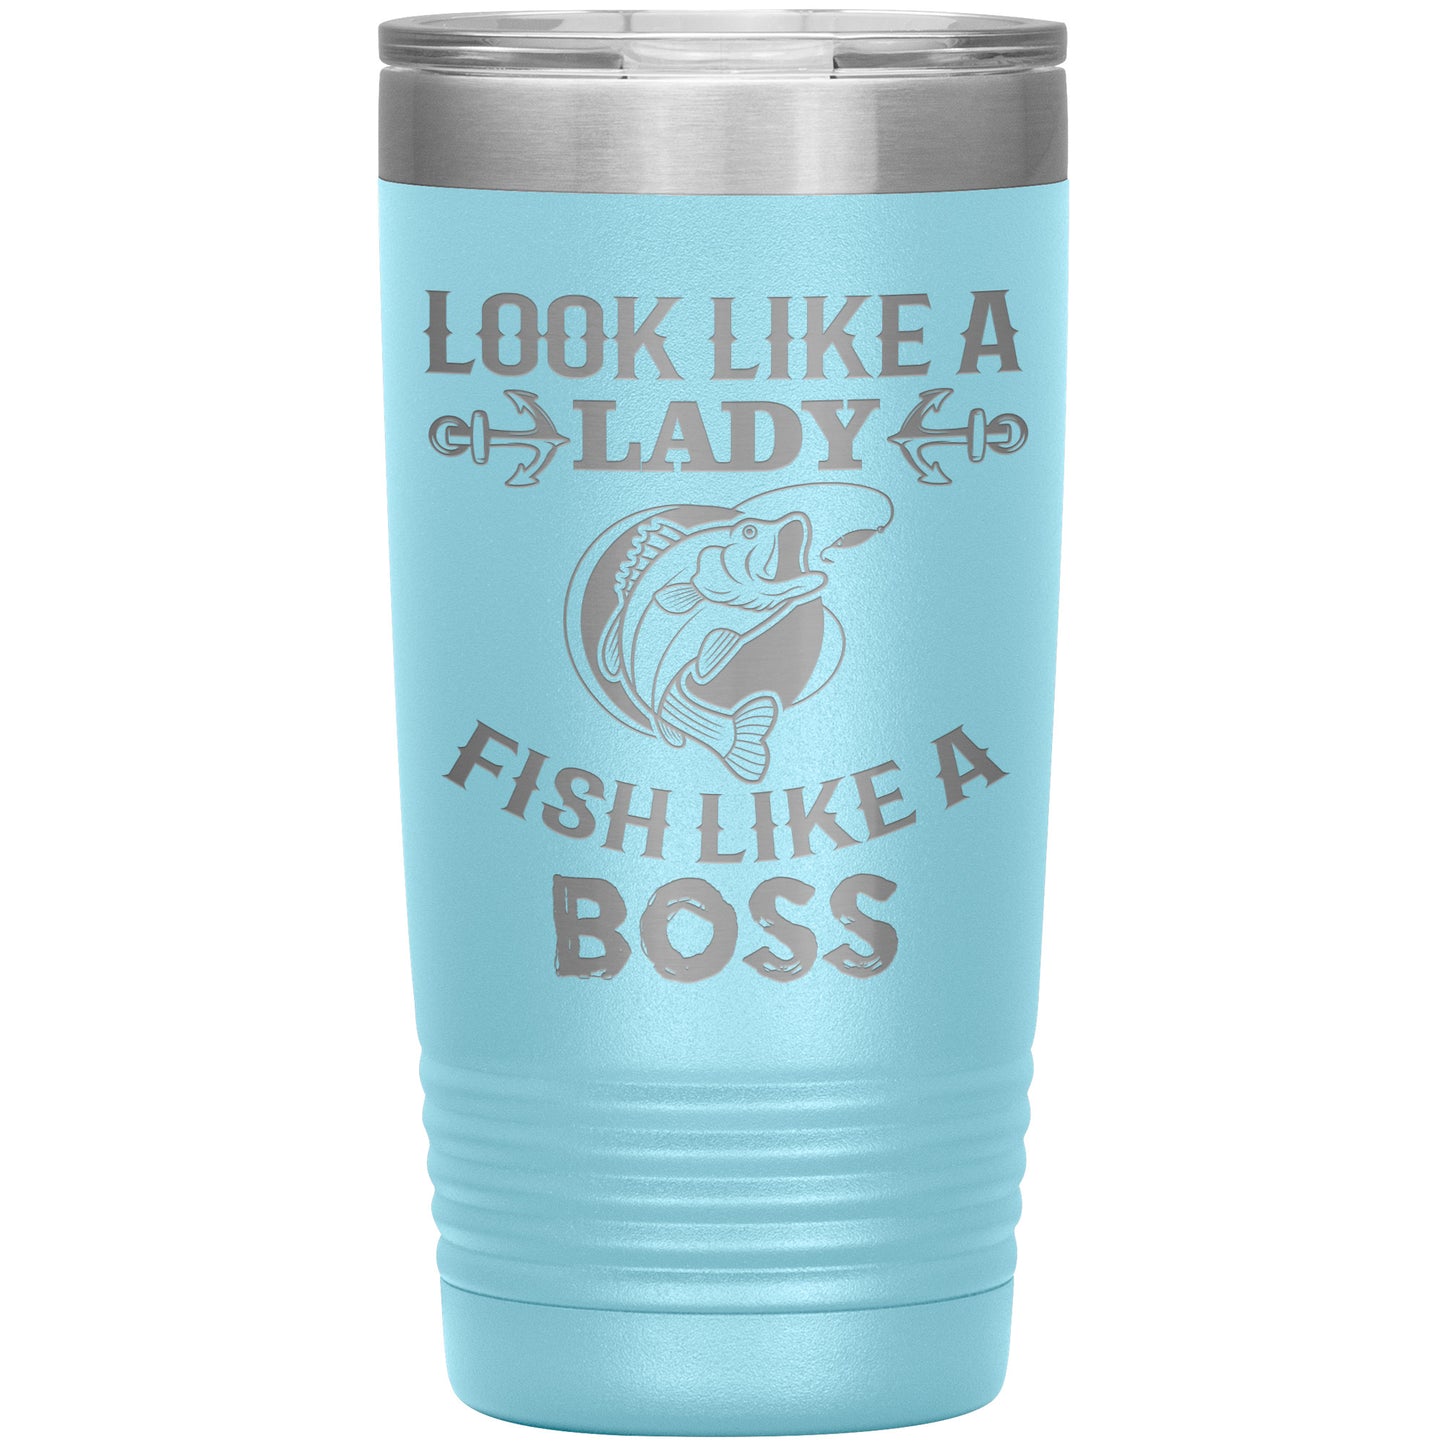 Look Like a Lady, Fish Like a Boss - Laser Etched Tumbler - 20oz